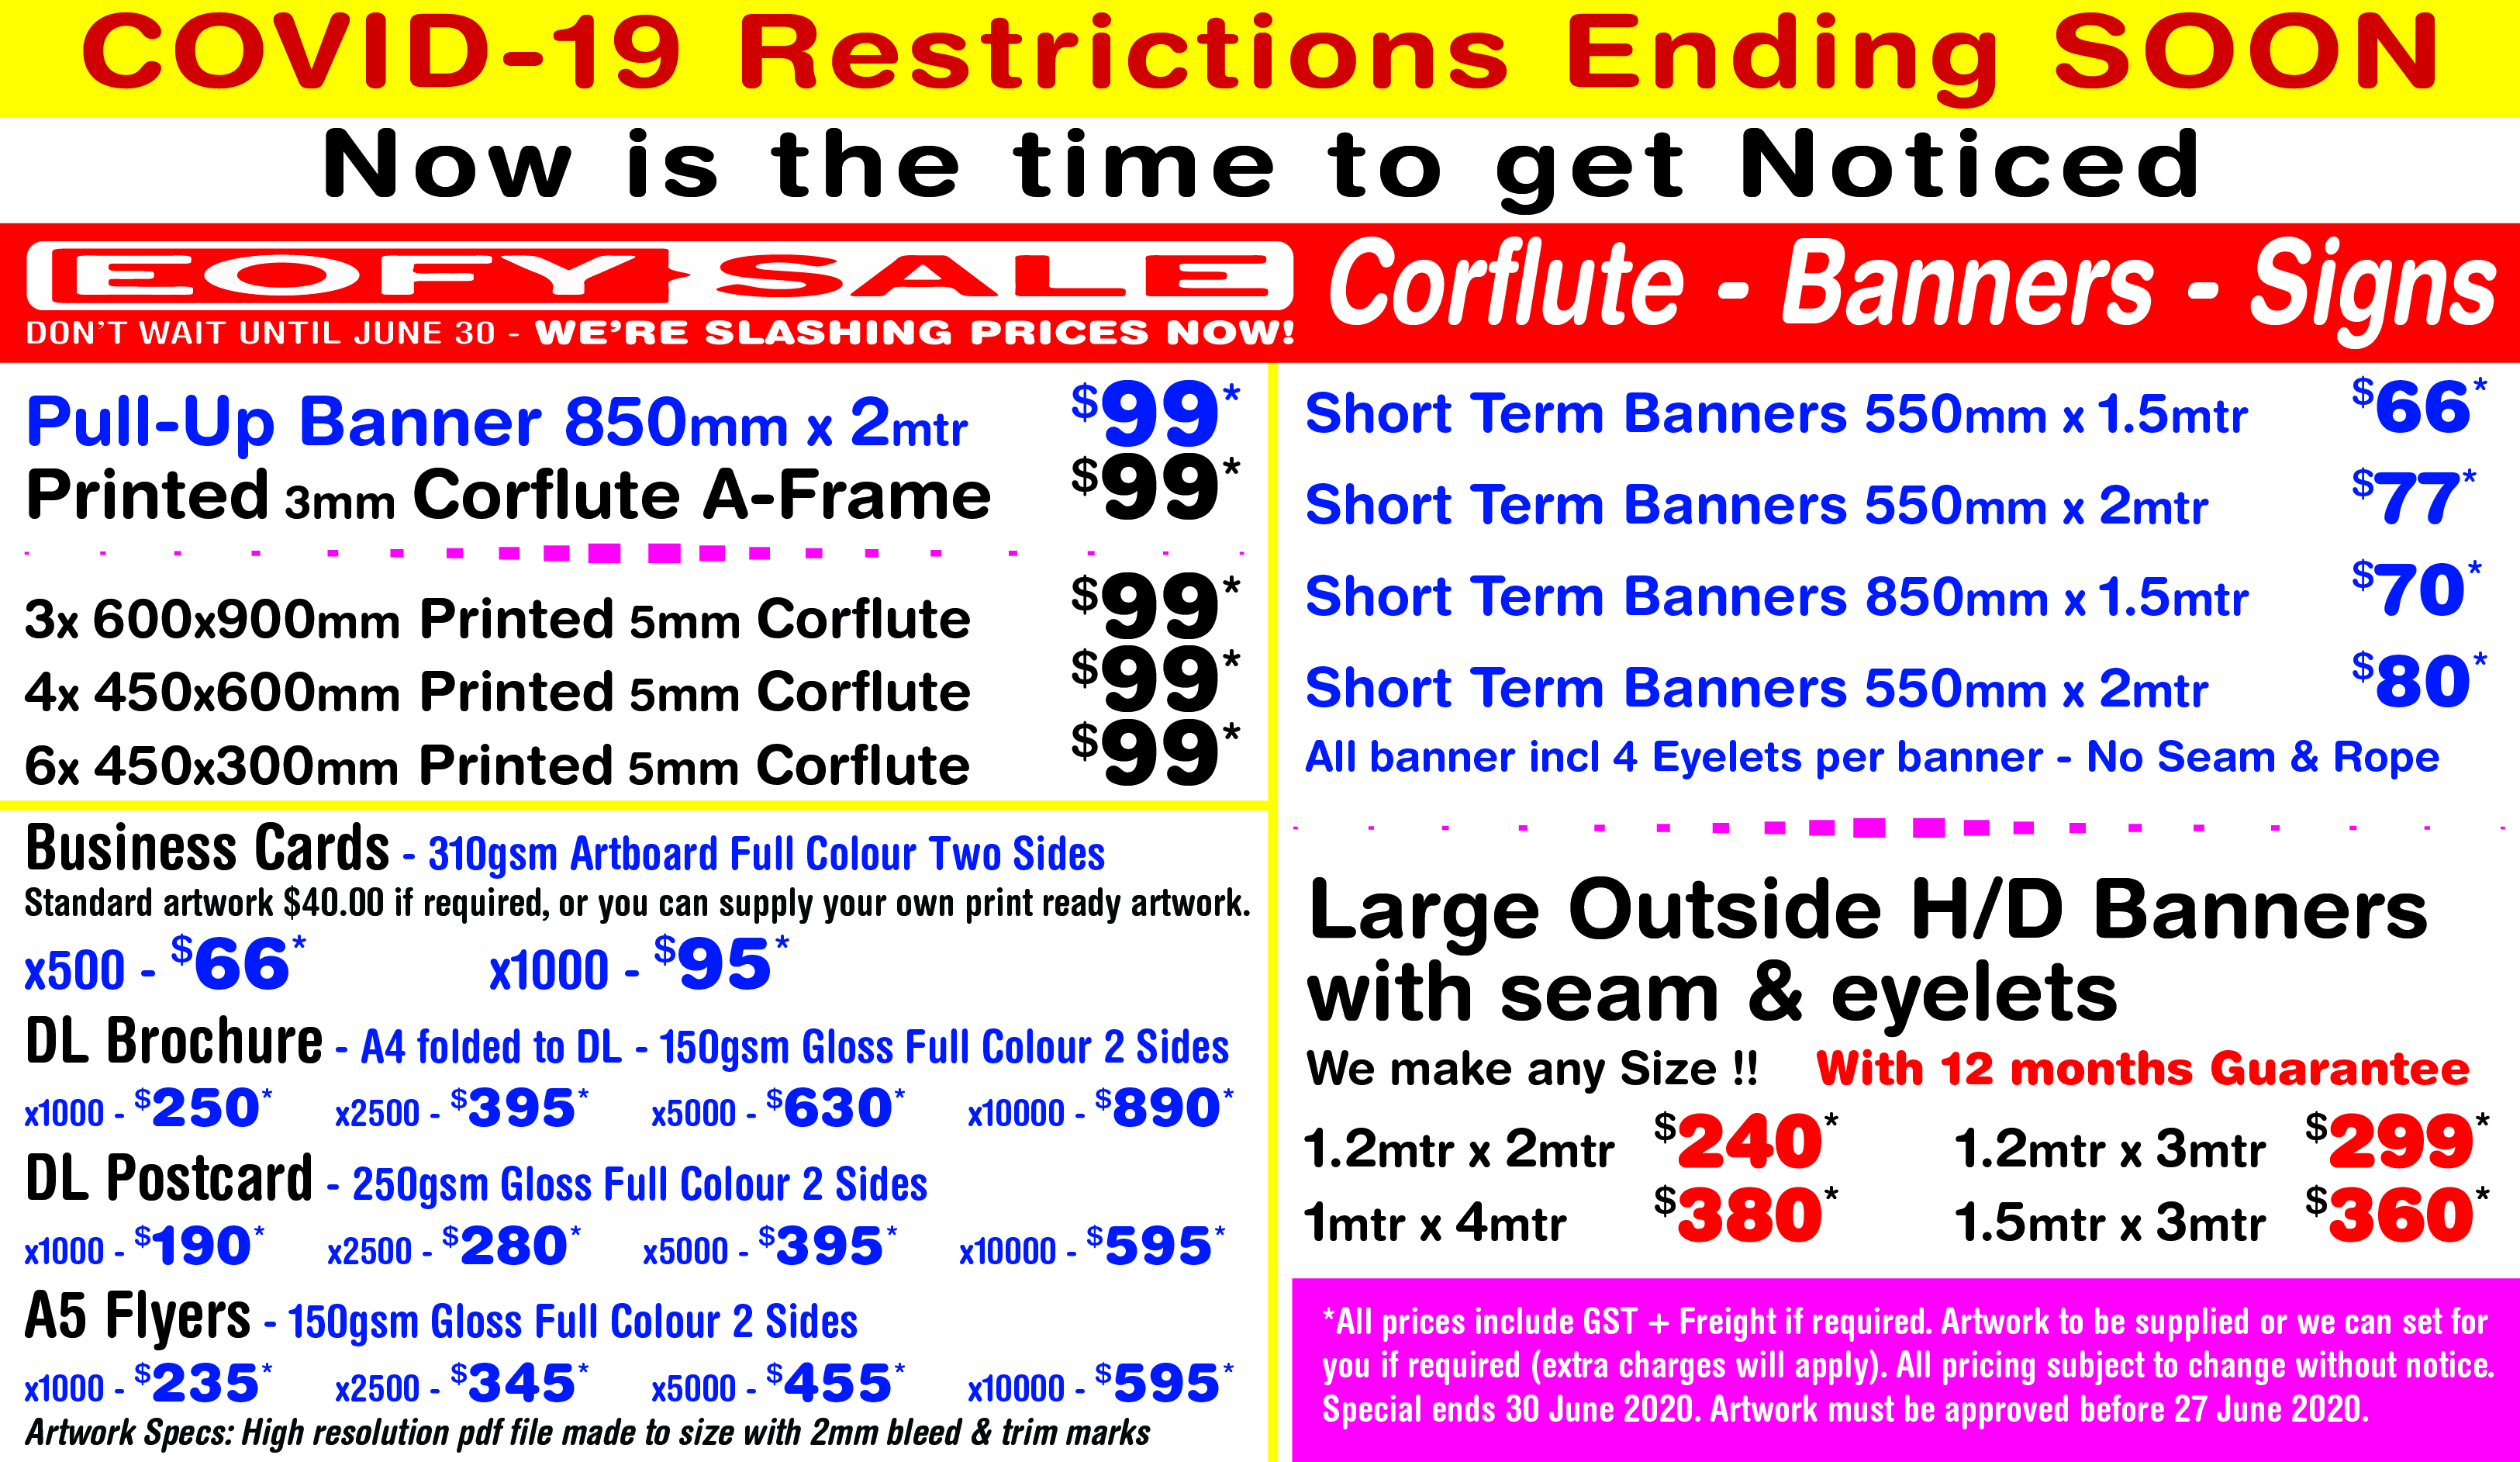 Jack Flash Signs EOFY SALE 2020. Special For ReOpening Business. Stickers, Posters, Banners, Pull Up Banners, Corflutes, A Frames, PopUp Wall Display, Car Signange, Car Magnets, Floor Graphics, ect